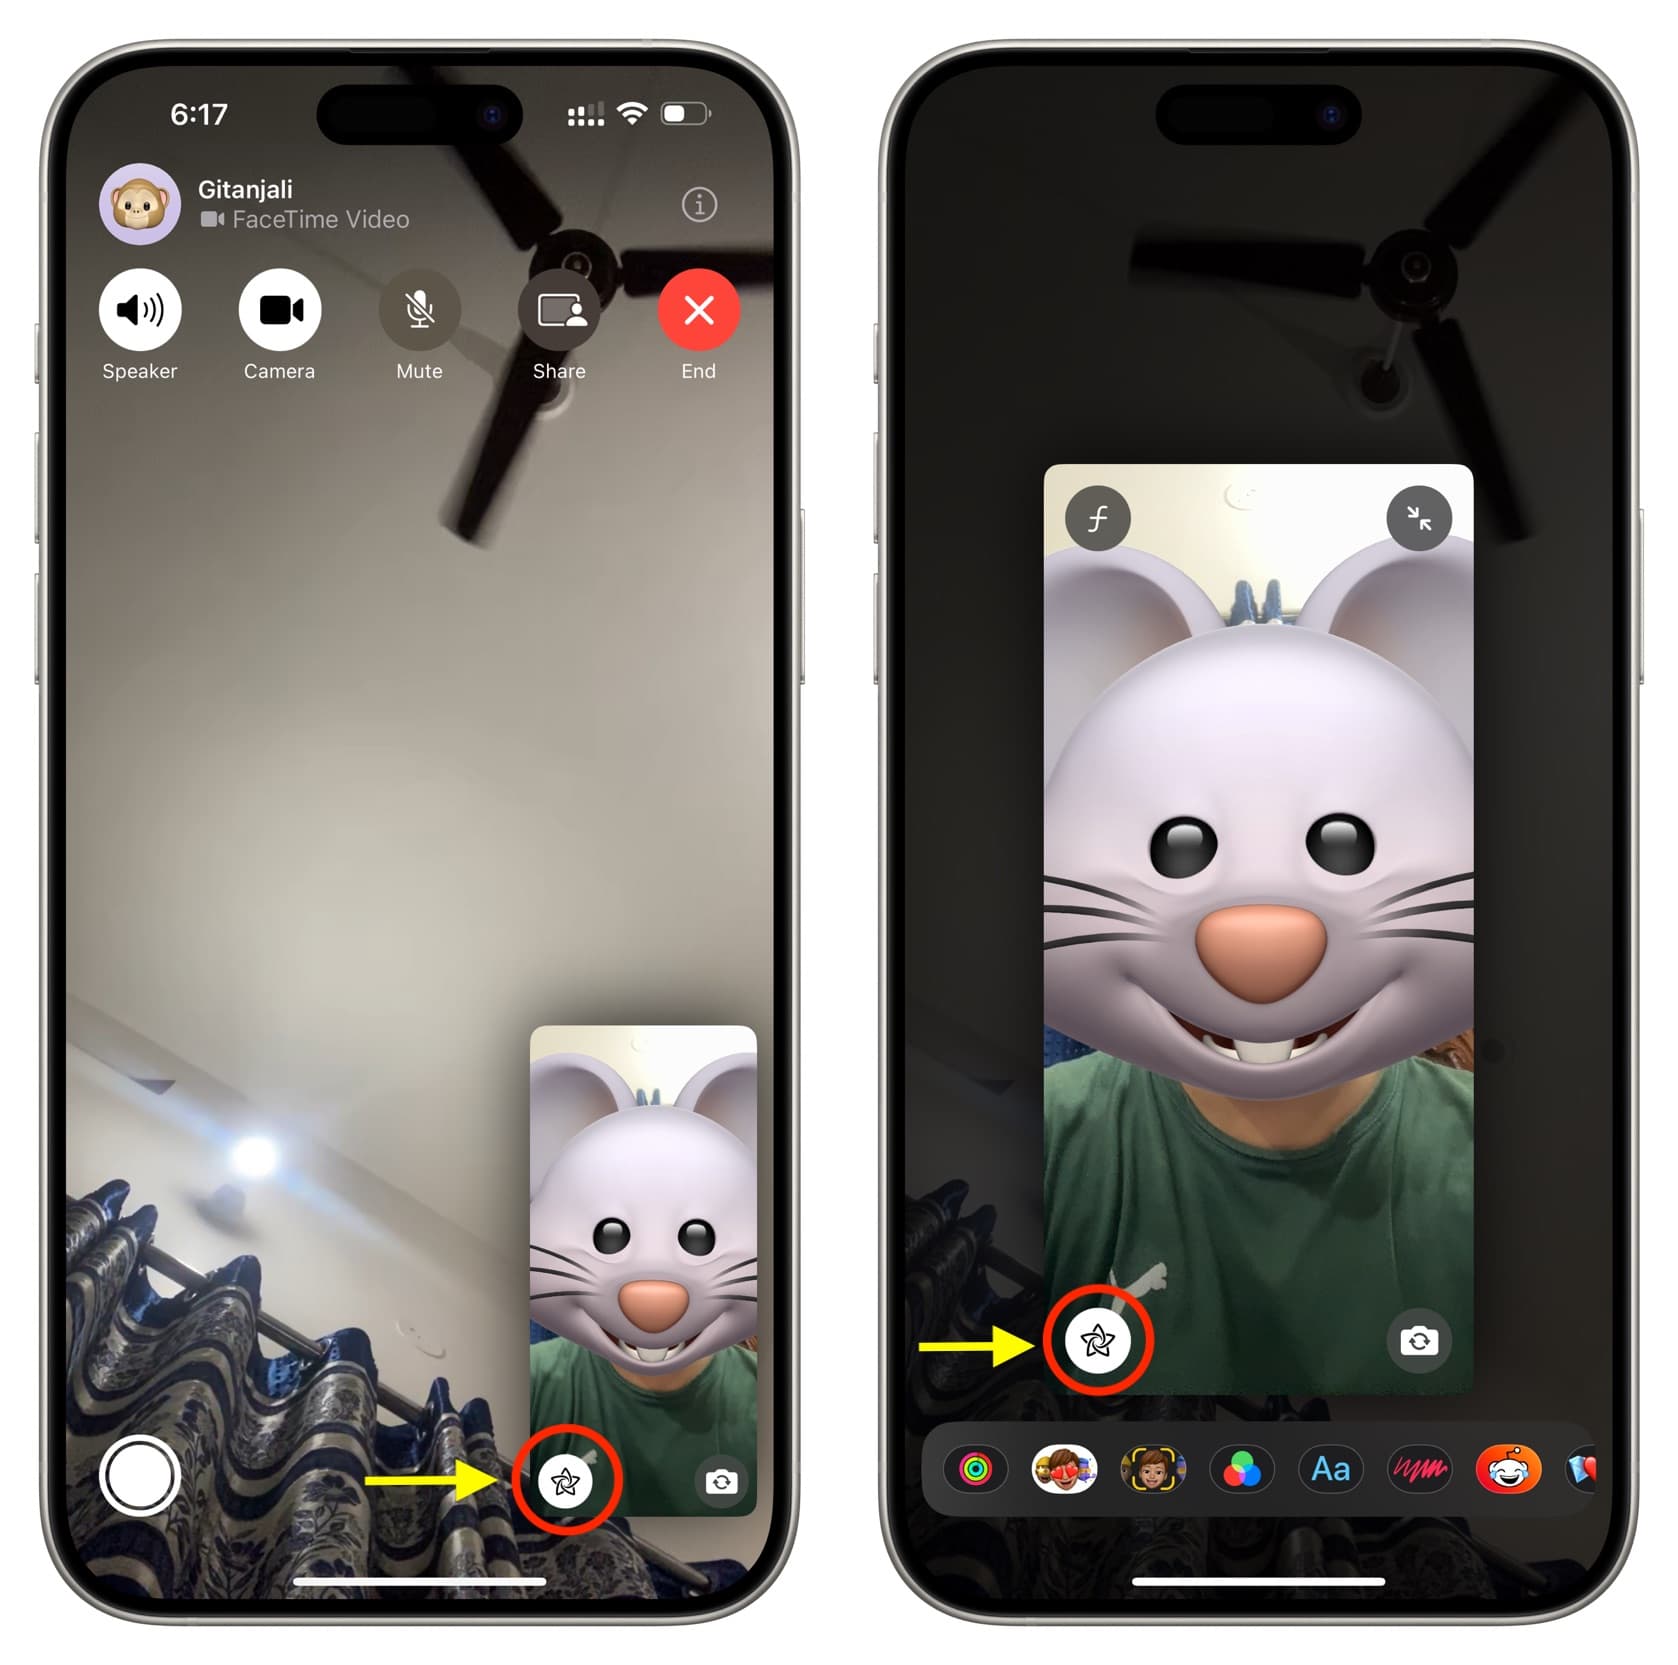 Turn off Memoji effects from FaceTime video call